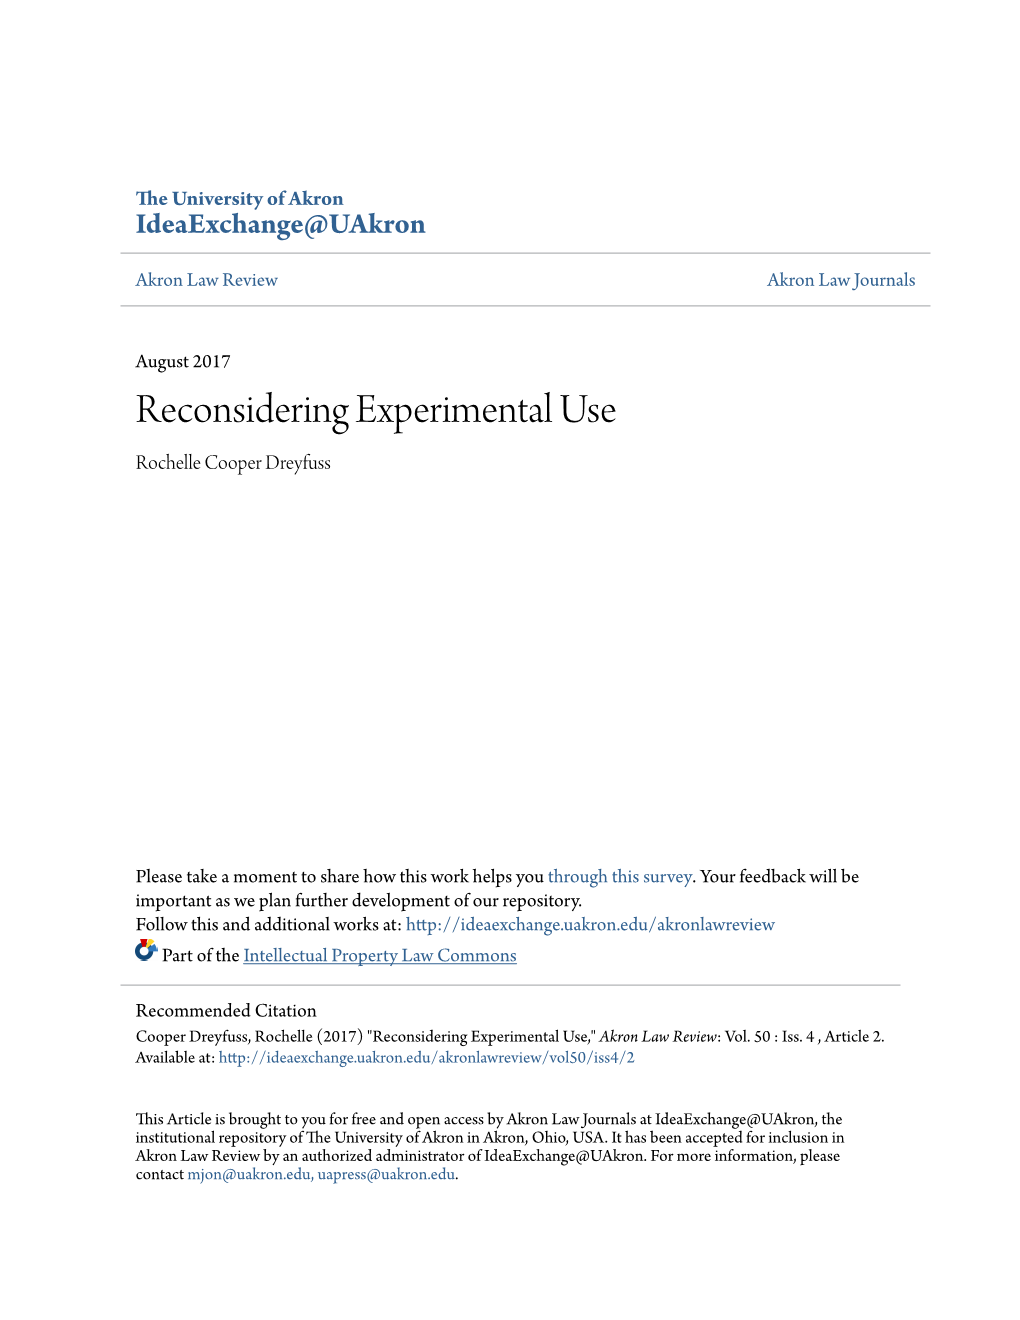 Reconsidering Experimental Use Rochelle Cooper Dreyfuss